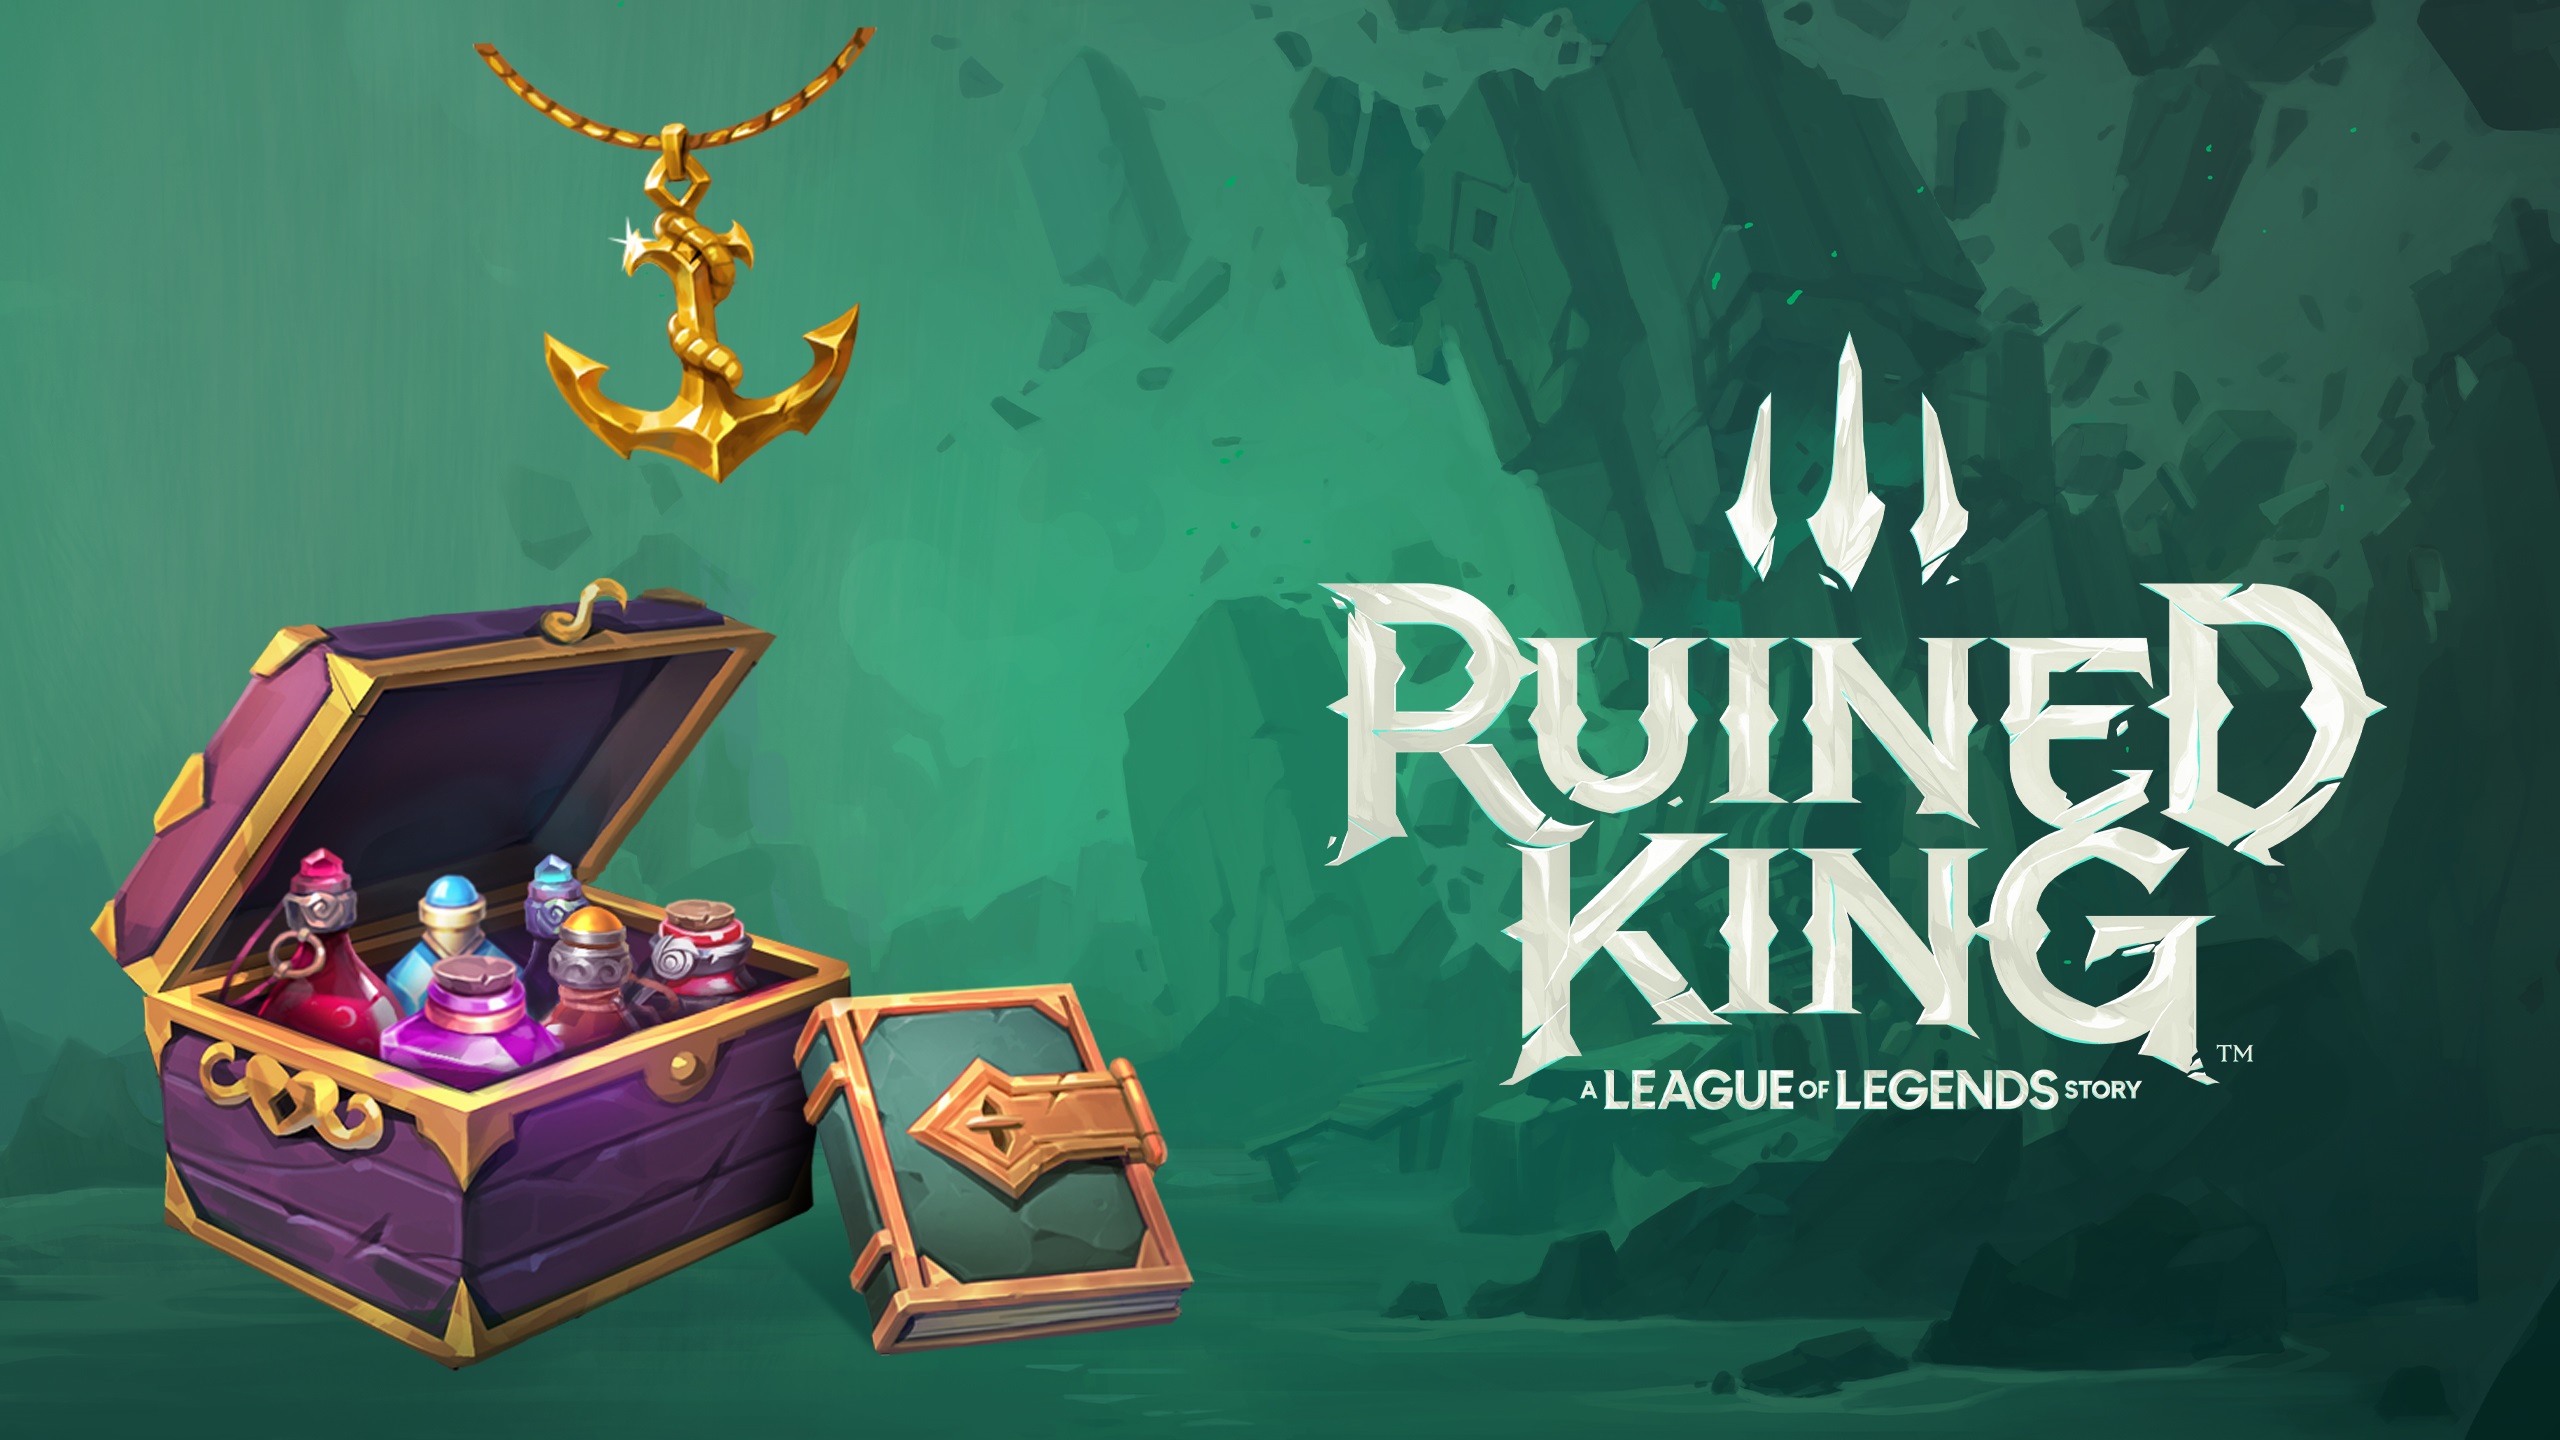 League of Legends Ruined King Wallpapers